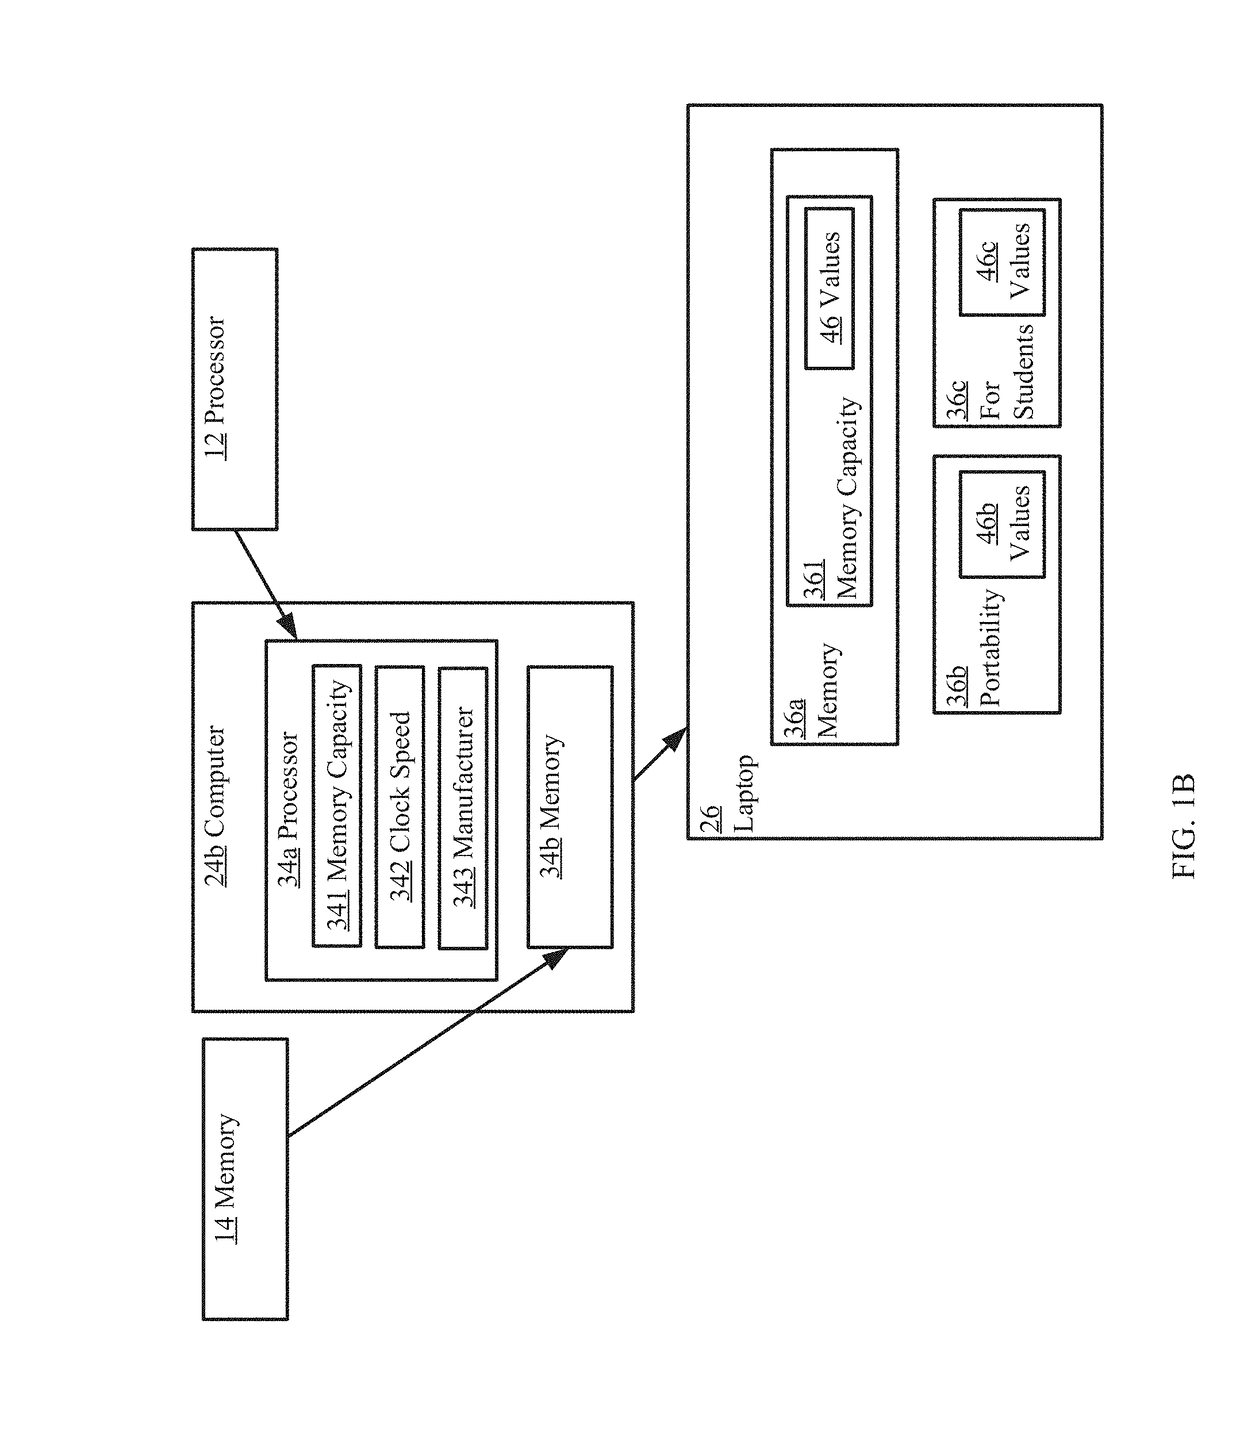 Systems and methods for computation of a semantic representation